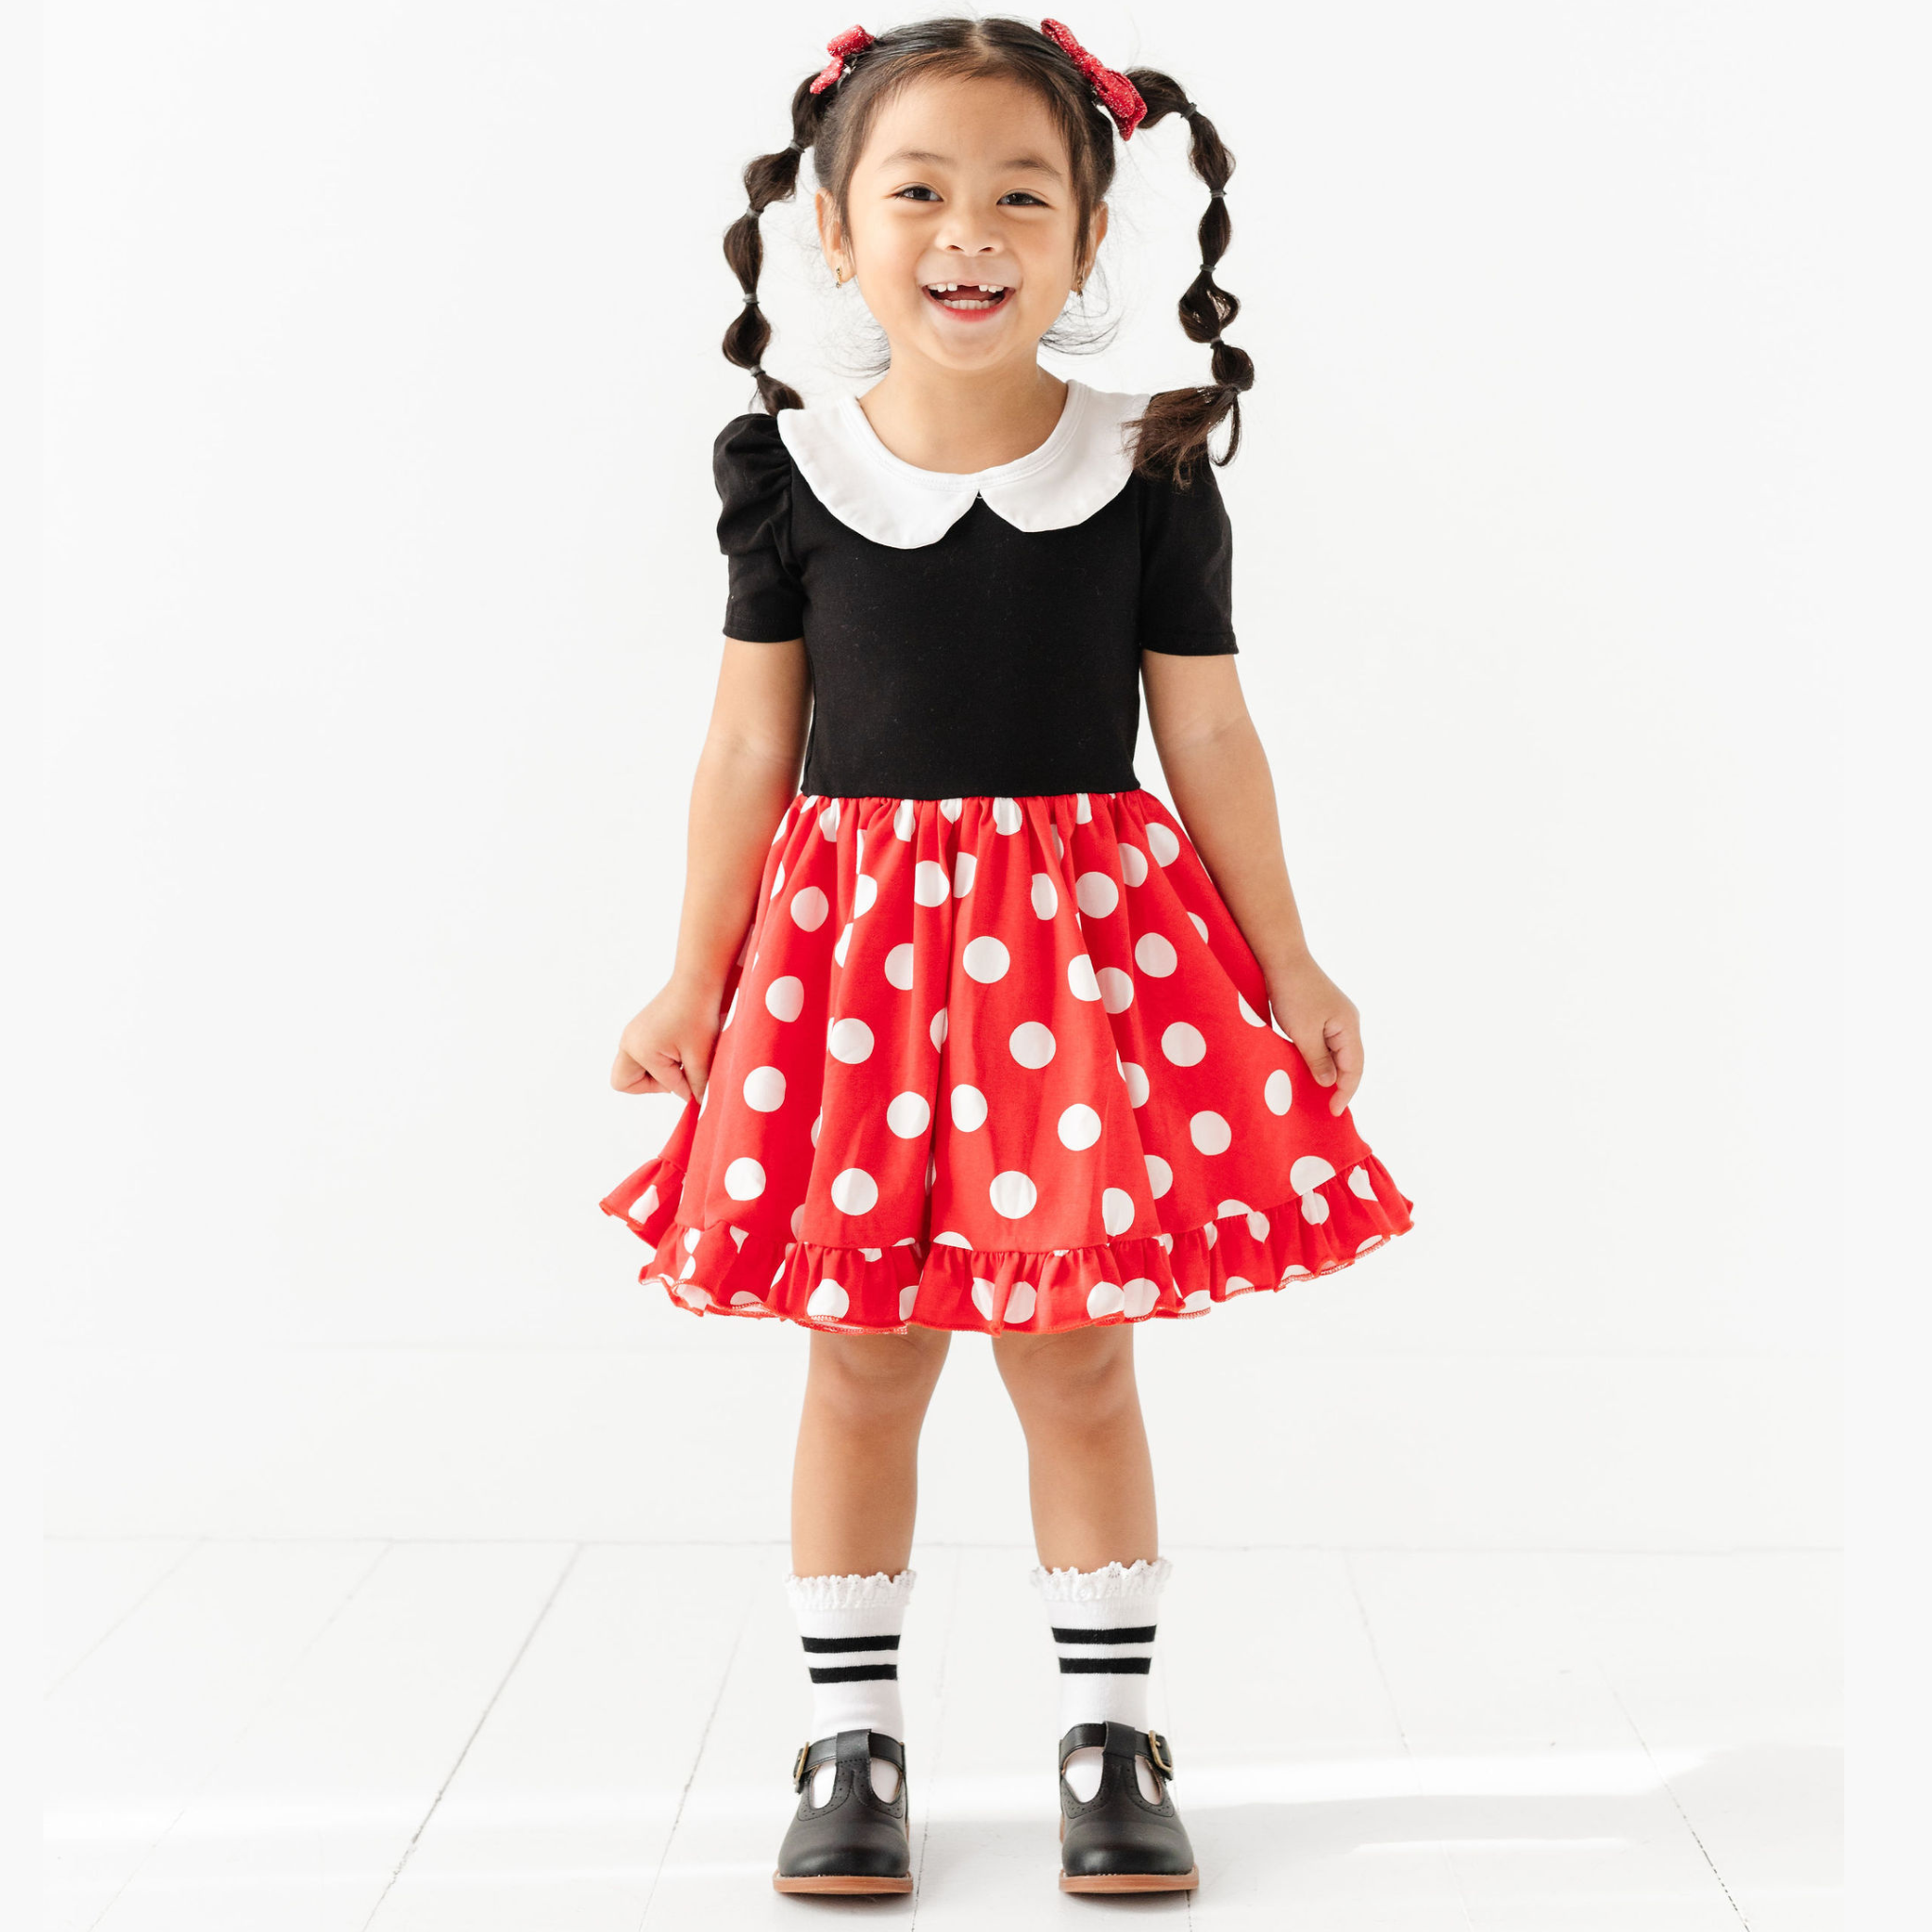 Buy Kaku Fancy Dresses Minnie Girl Cartoon Costume -Red & White, 5-6 Years  Online at Low Prices in India - Amazon.in